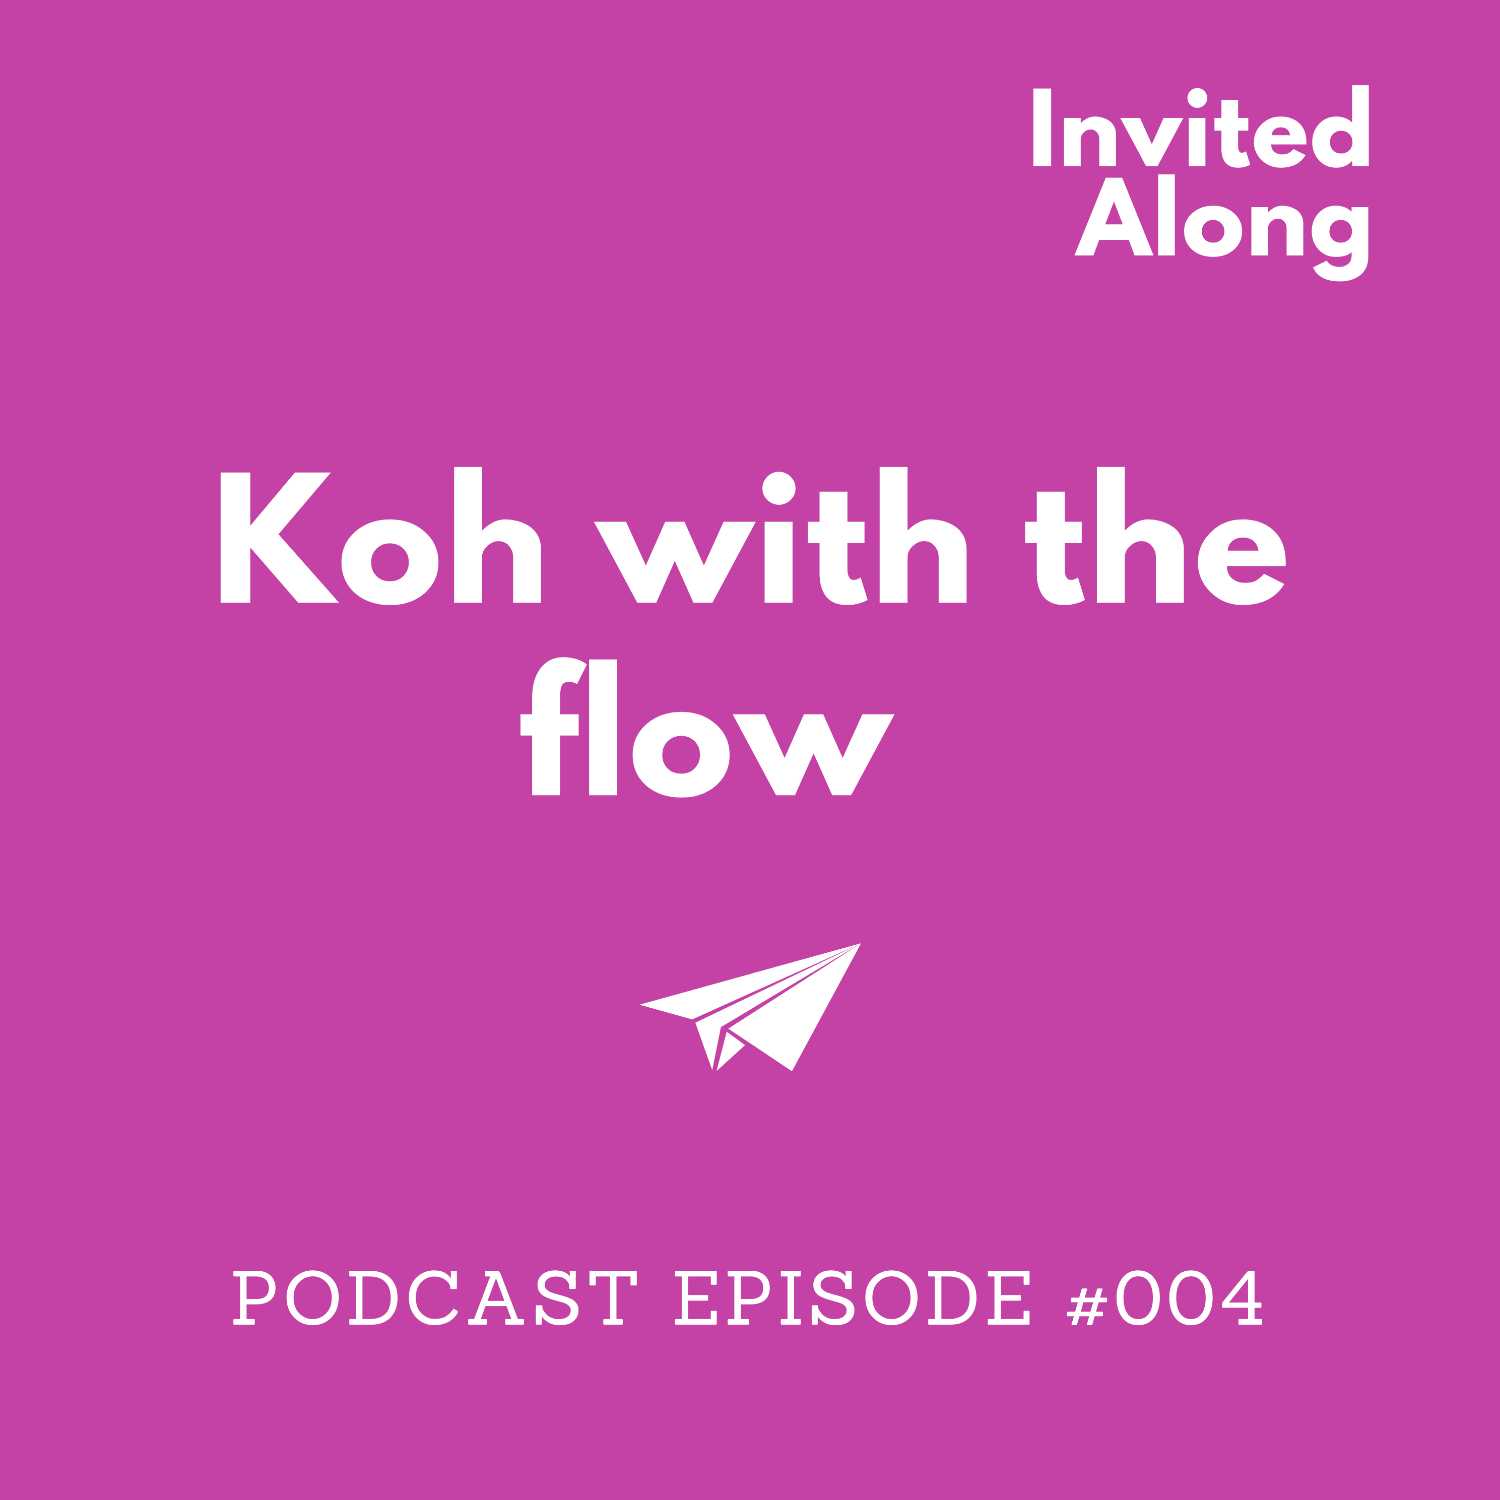 Episode 004 | Koh with the flow